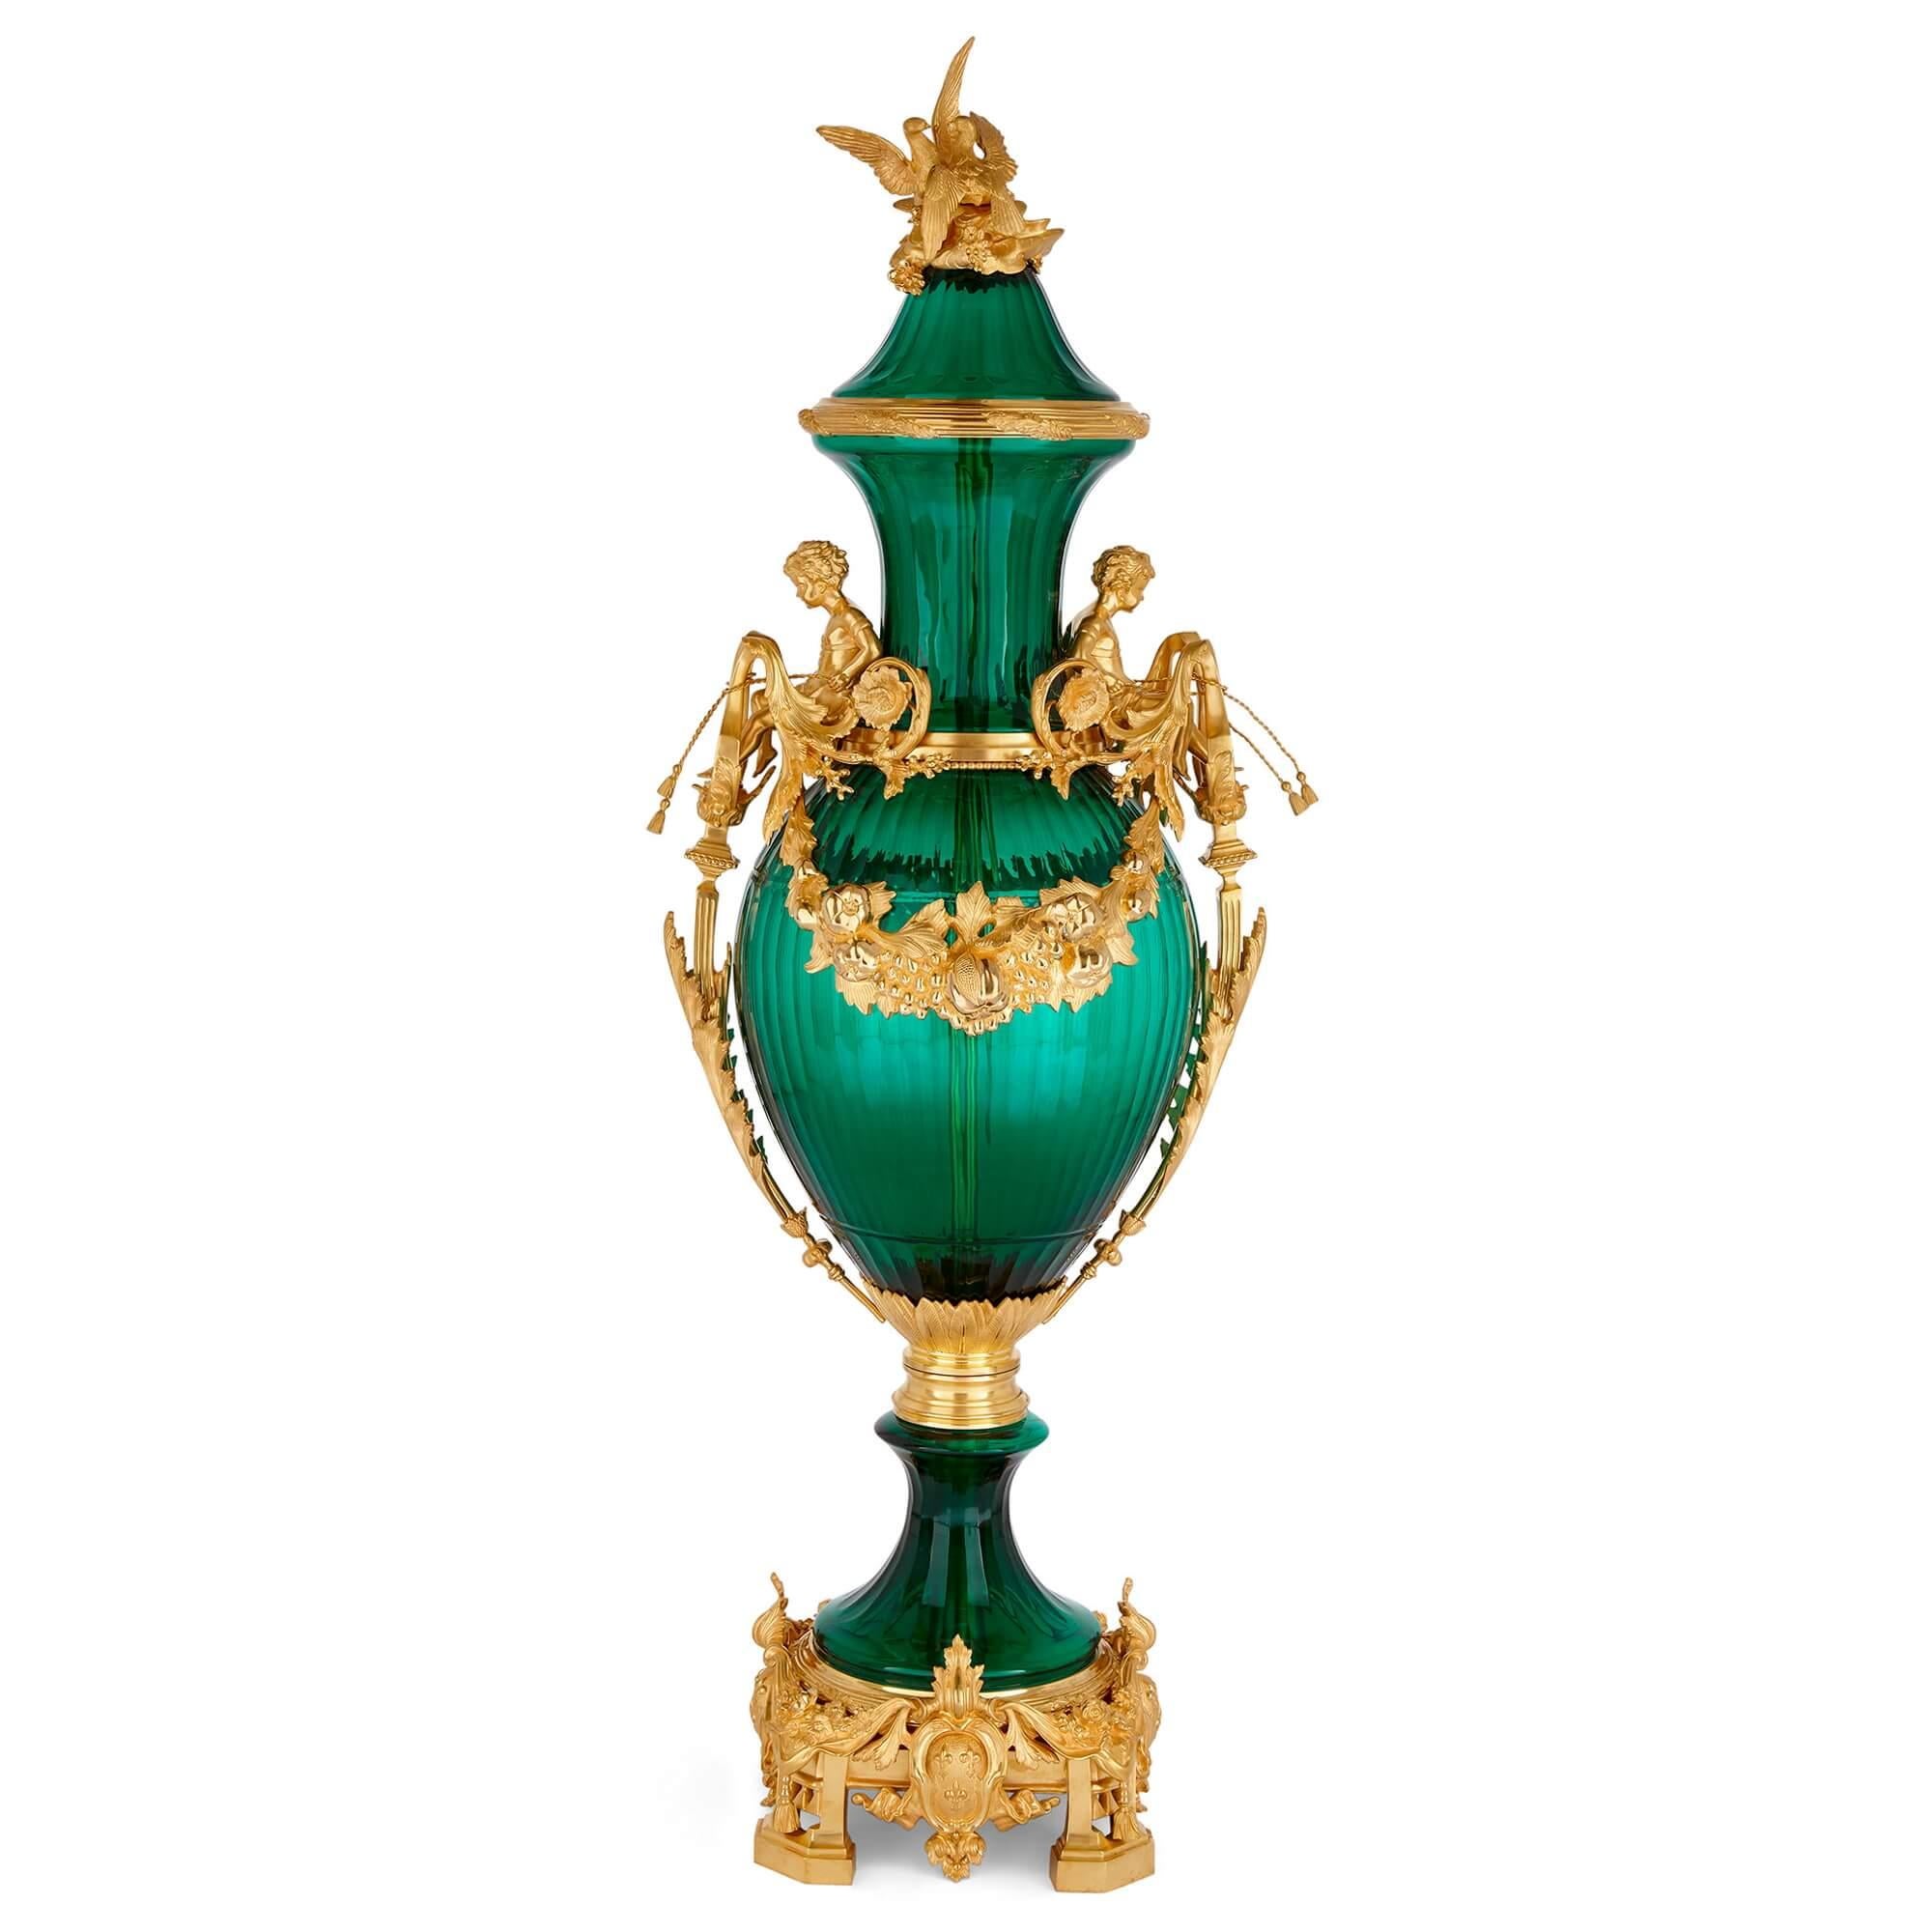 Set of two large green glass gilt bronze mounted vases
French, 20th Century
Height 153cm, width 50cm, depth 53cm 

Pairing gilt bronze with striped green glass, these grand French vases exude the elegance of Neoclassical design, subtly touched by